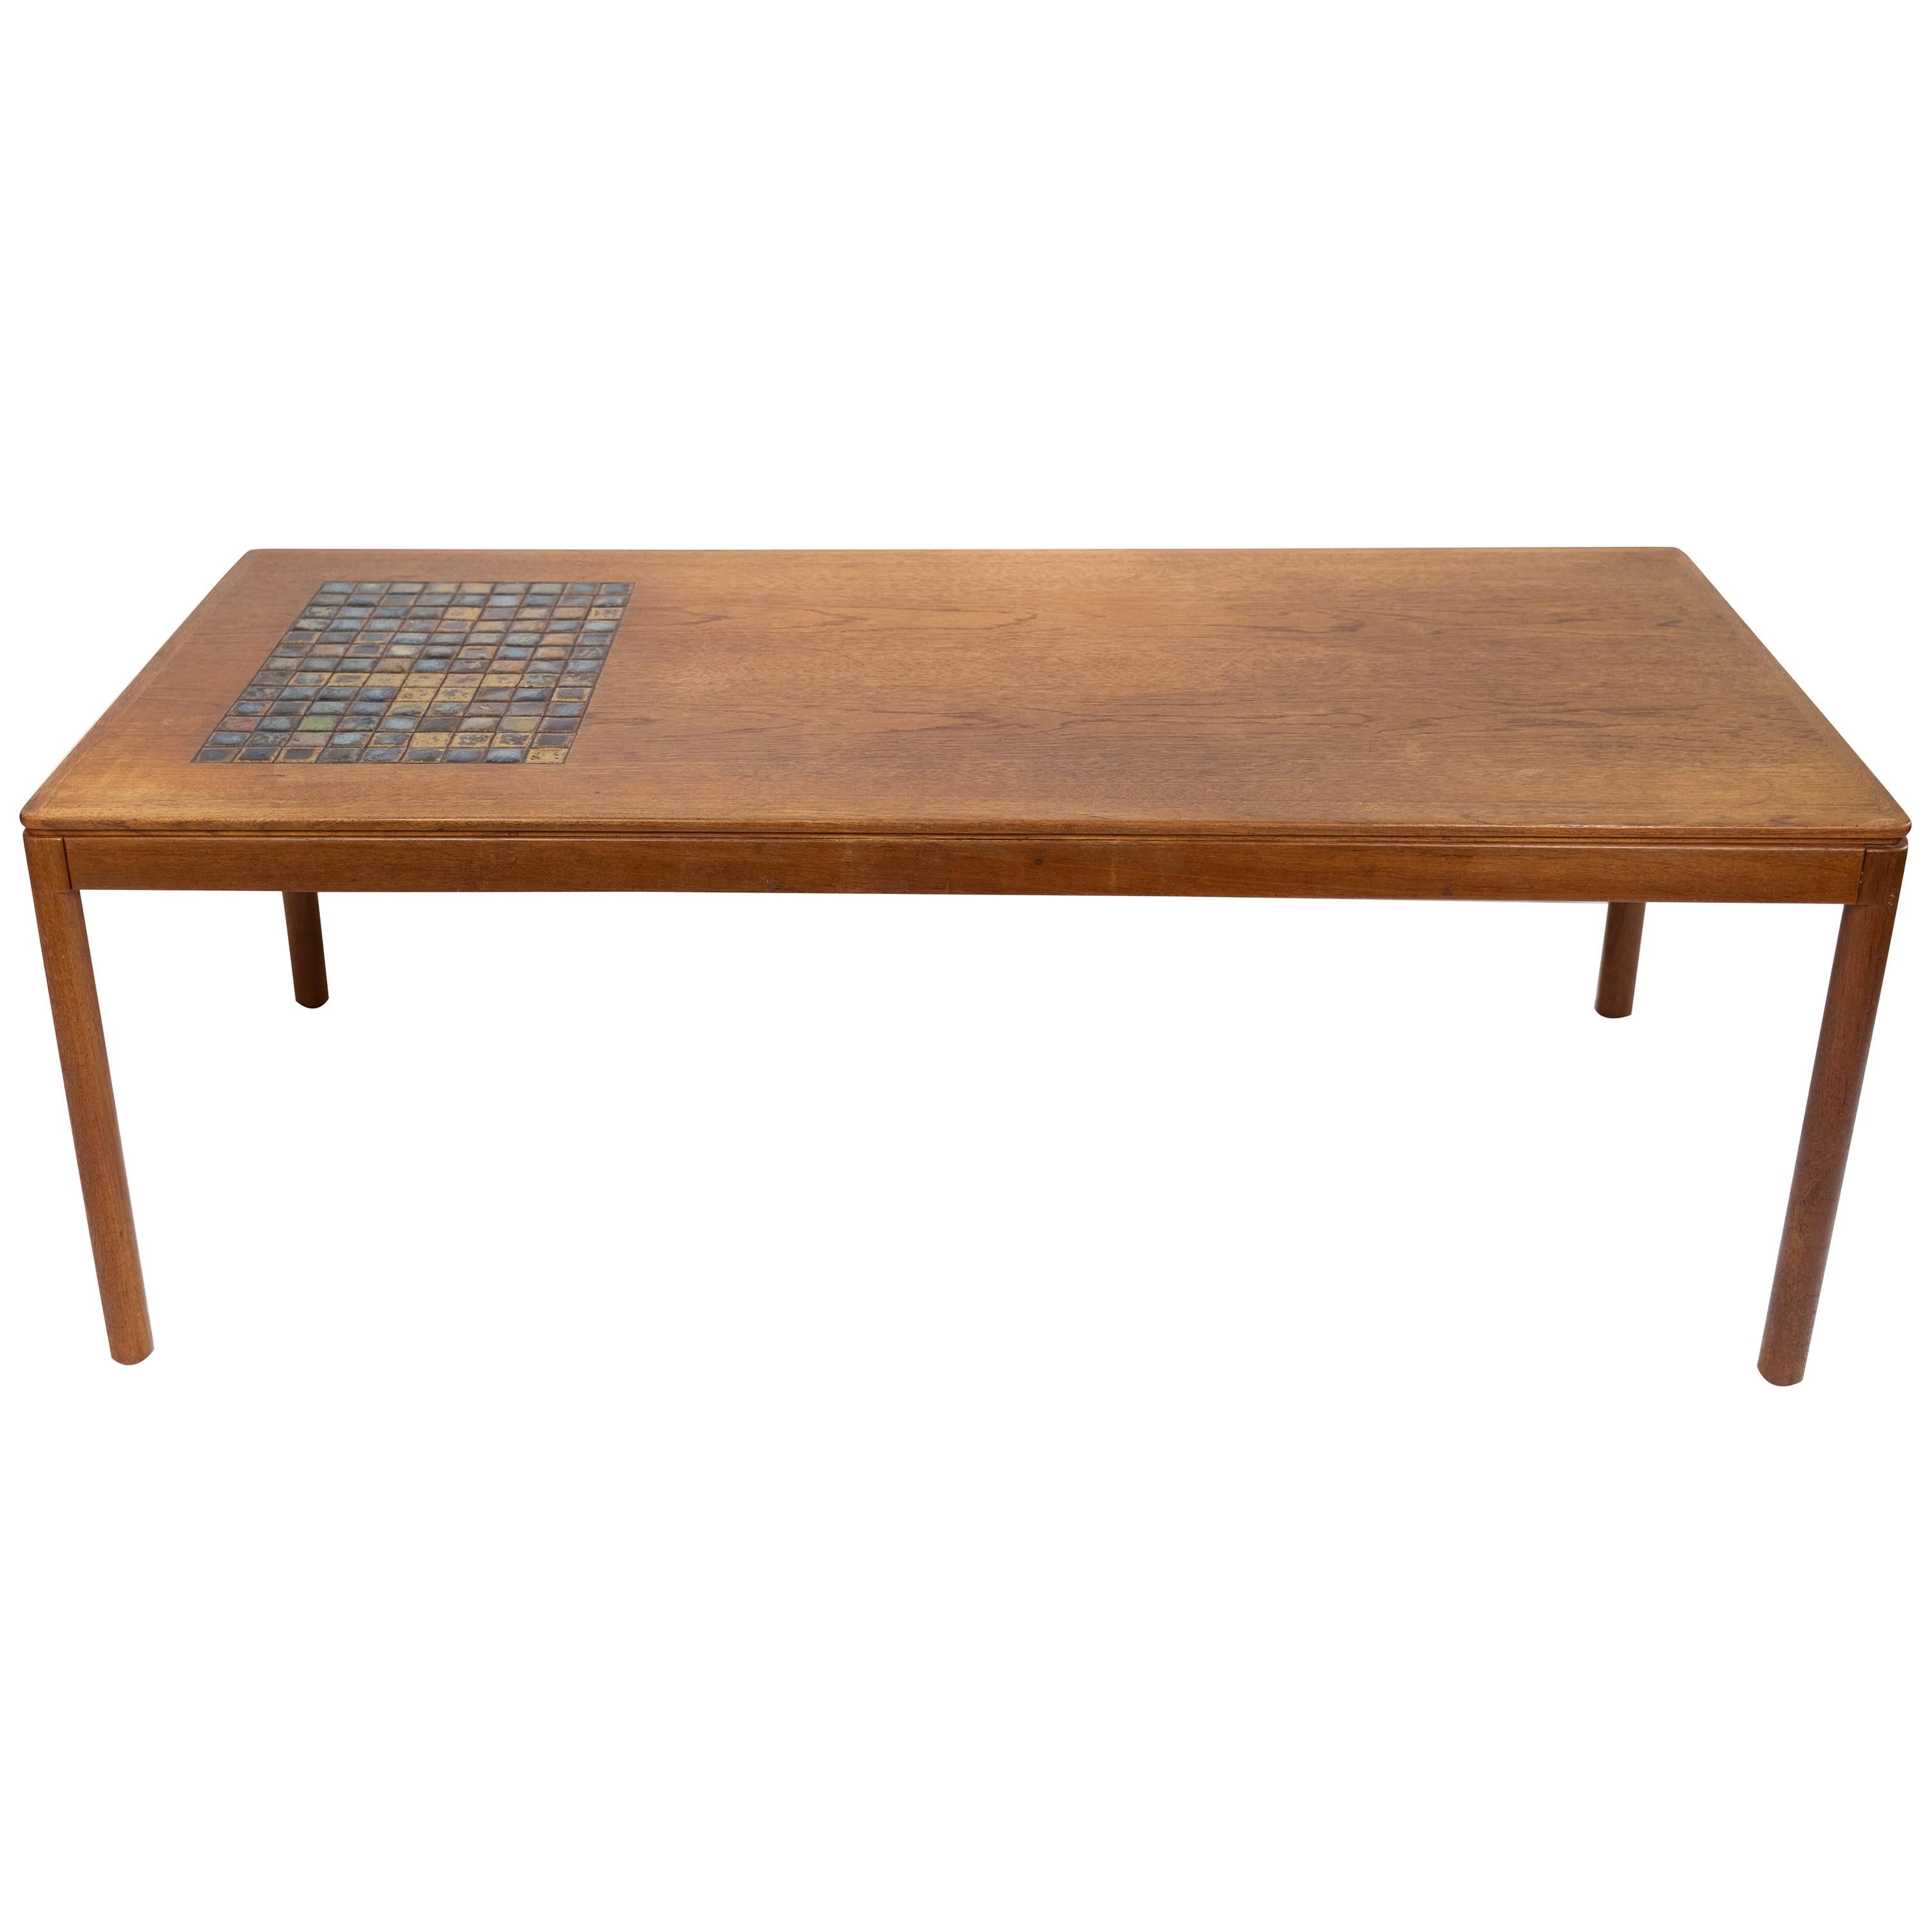 Coffee Table in Teak with Brown Ceramic Tiles of Danish Design from the 1960s